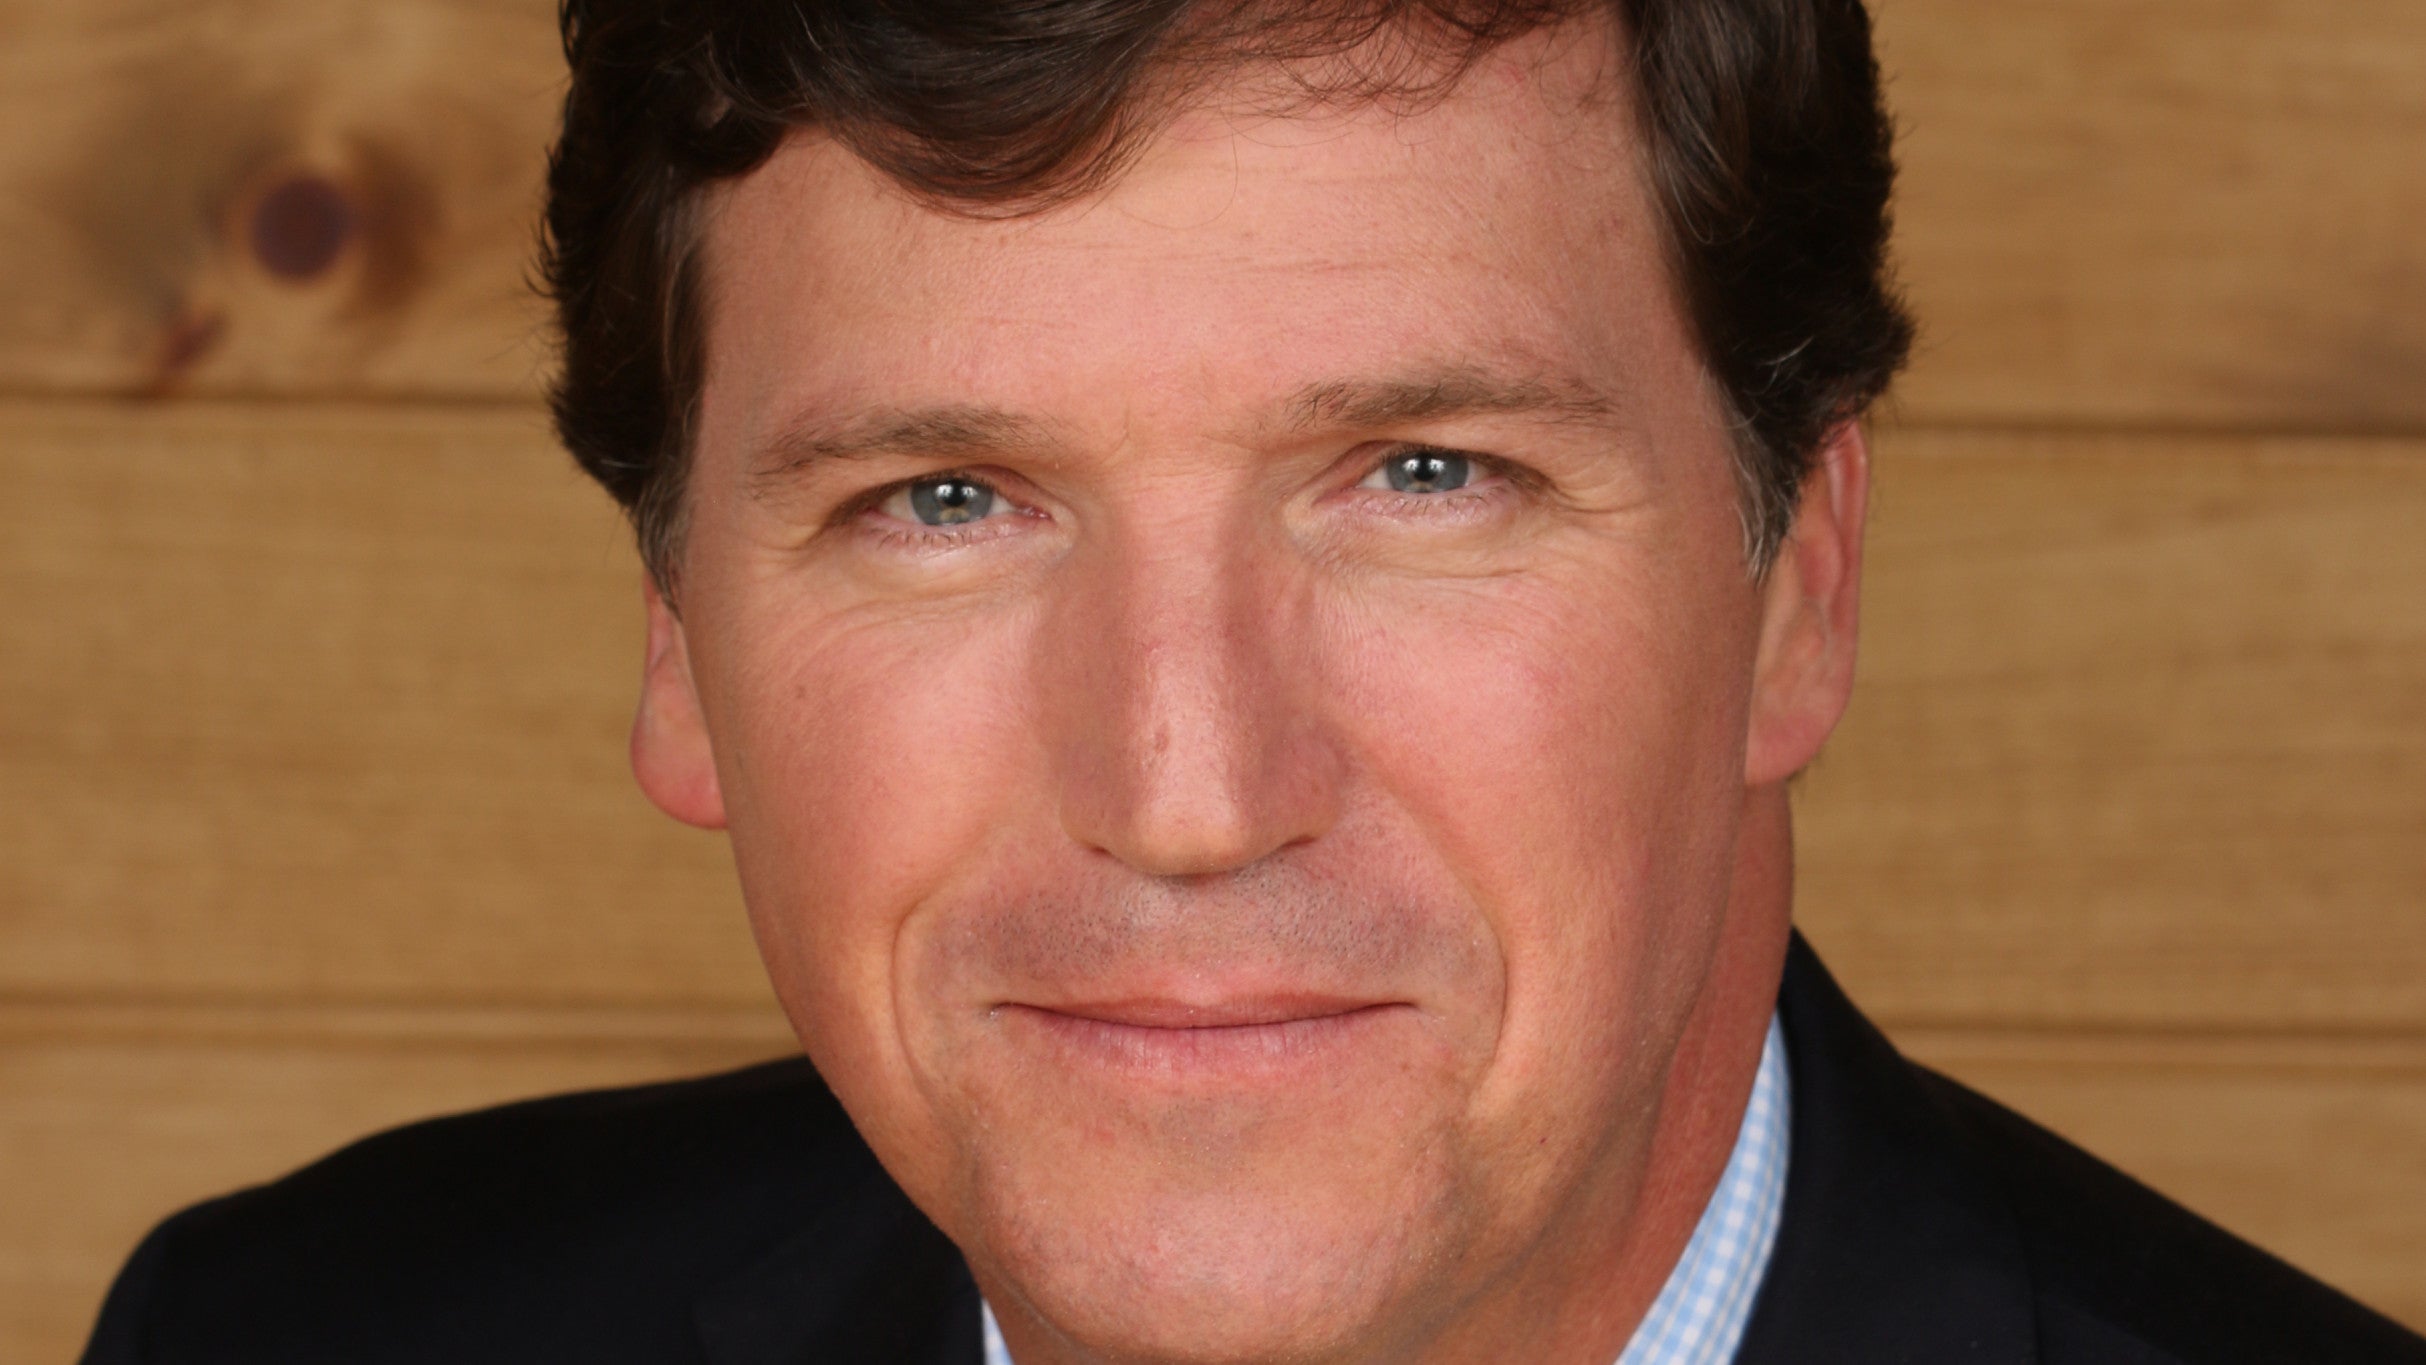 Tucker Carlson Live in Edmonton promo photo for Exclusive presale offer code